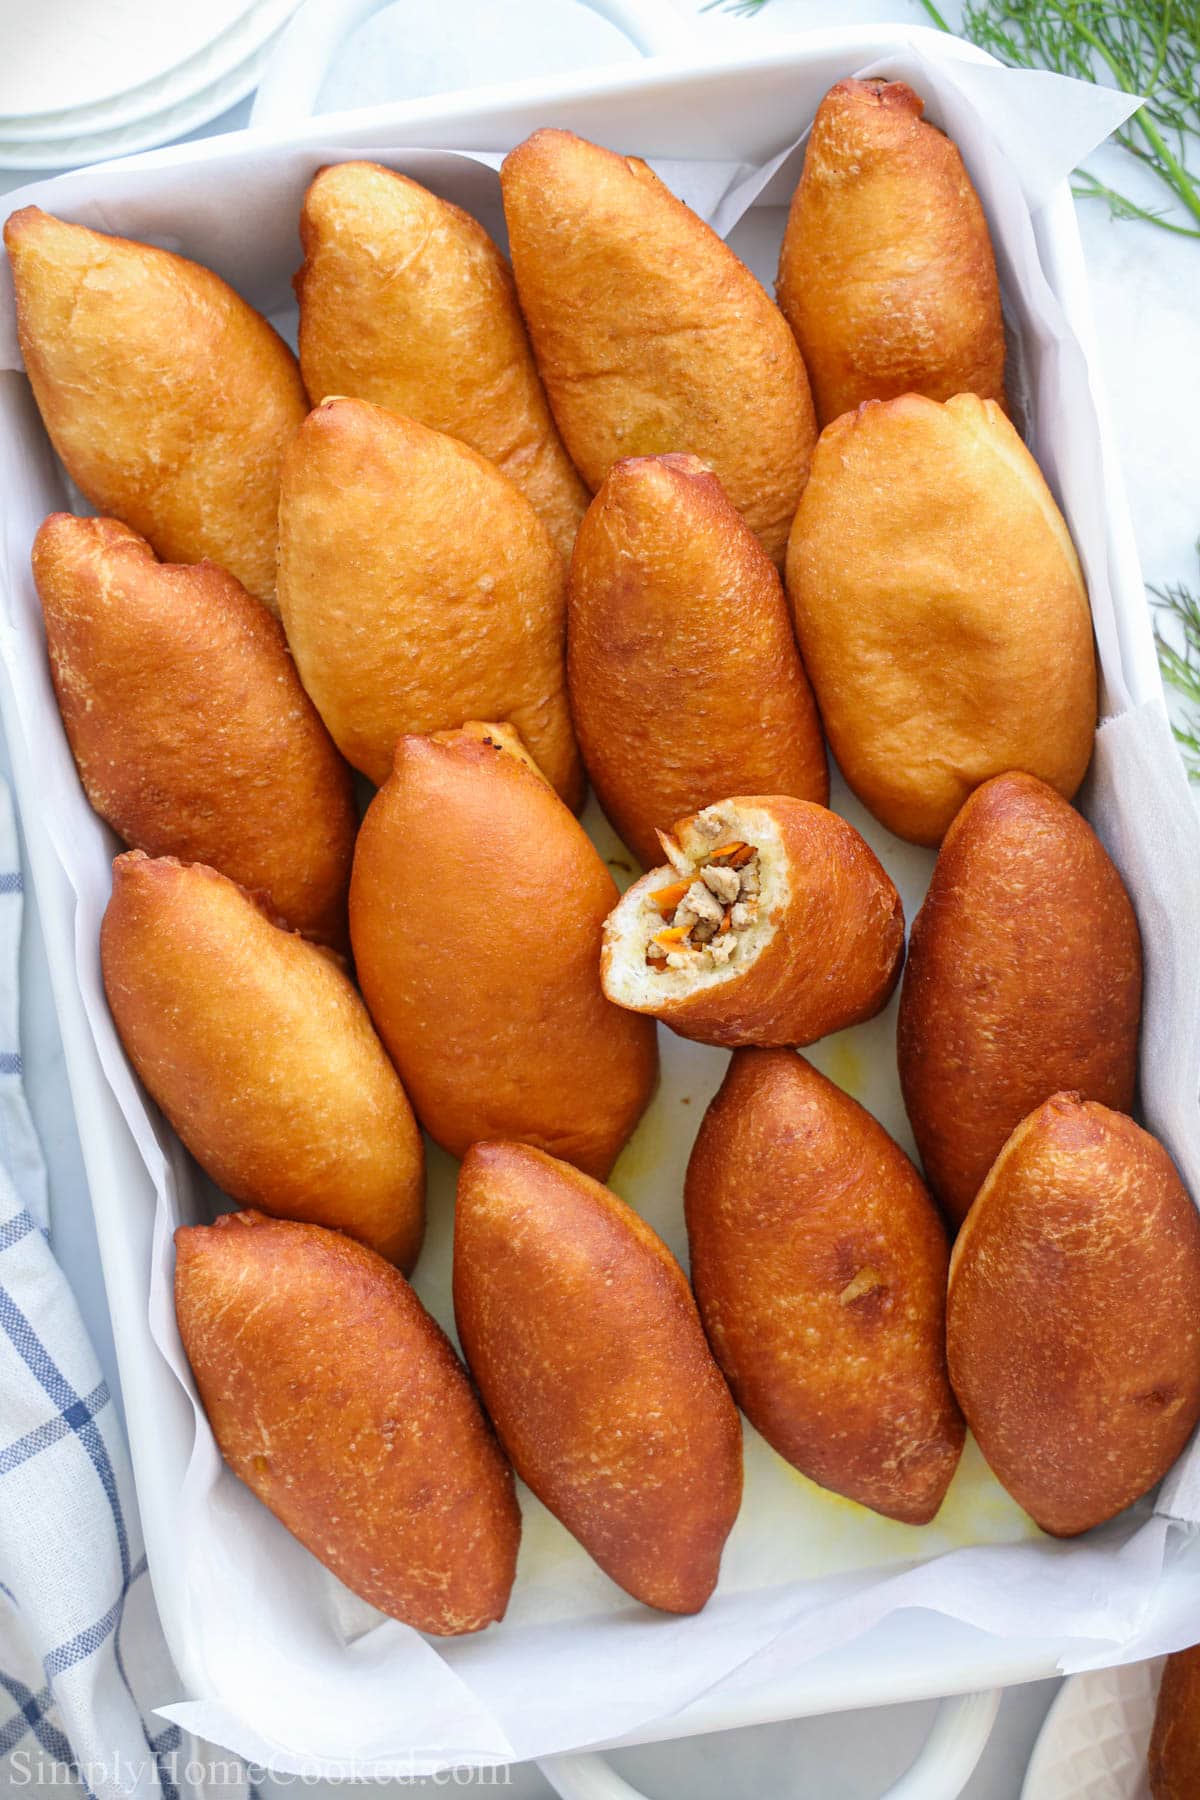 Piroshki lined up in a container with one missing a bite